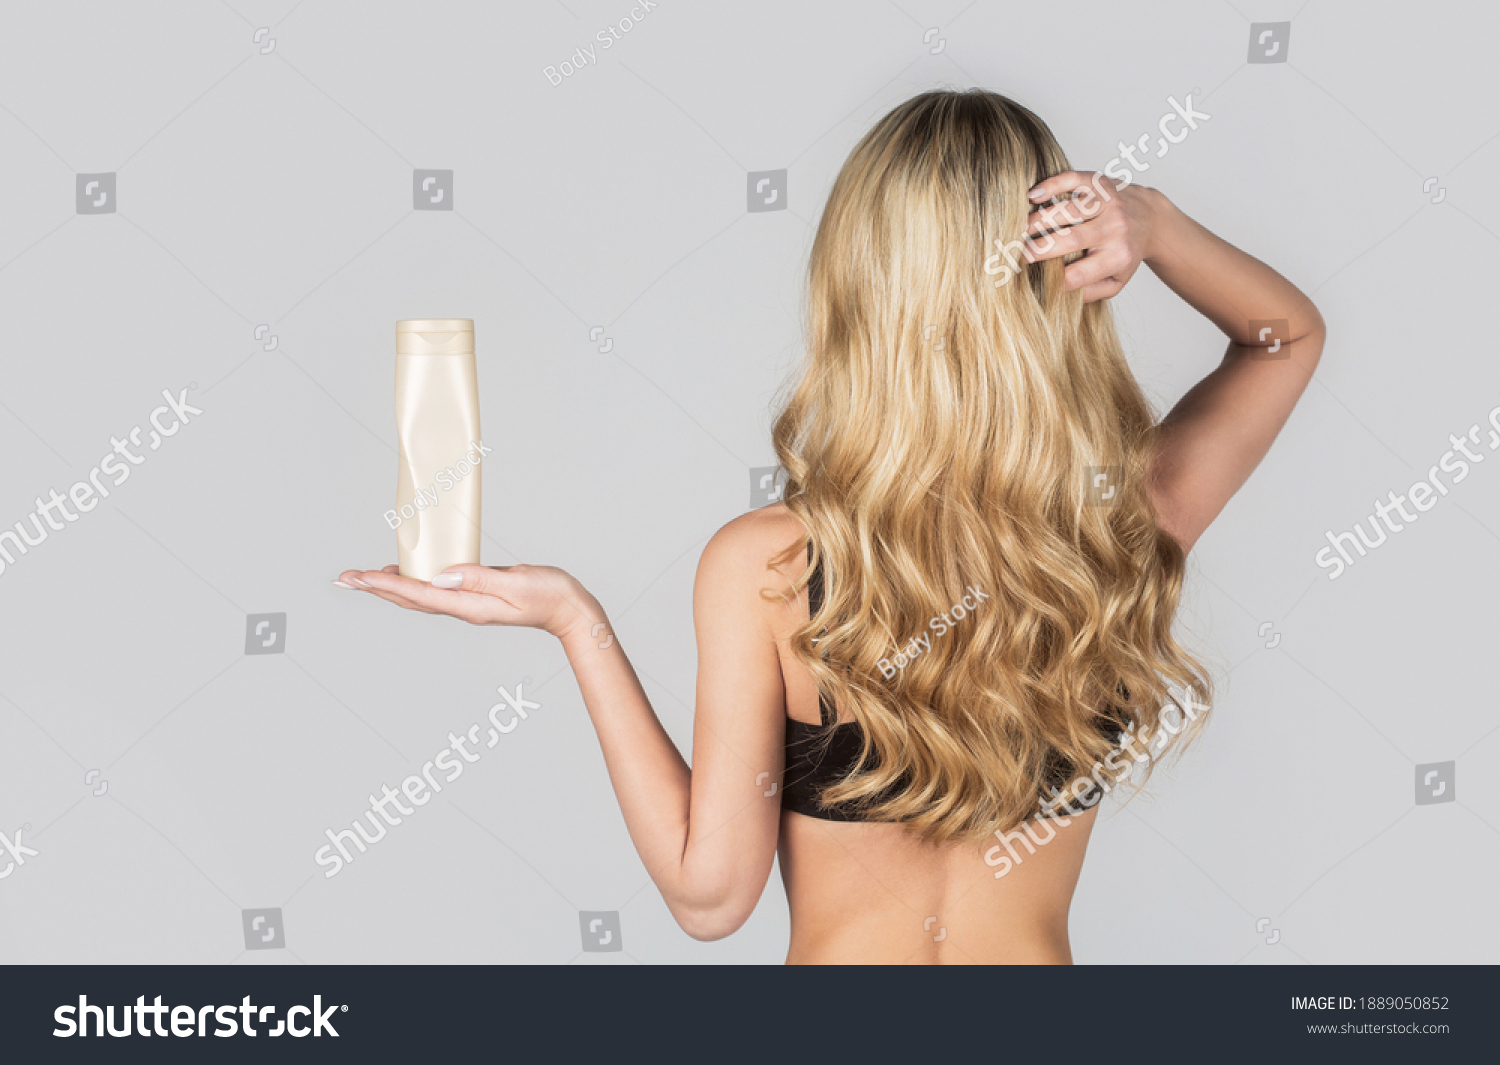 Beautiful blonde girl with a bottle of shampoos in hands. Girl with shiny and long hair. Woman long hair. Woman hold bottle shampoo and conditioner. Woman holding shampoo bottle. #1889050852